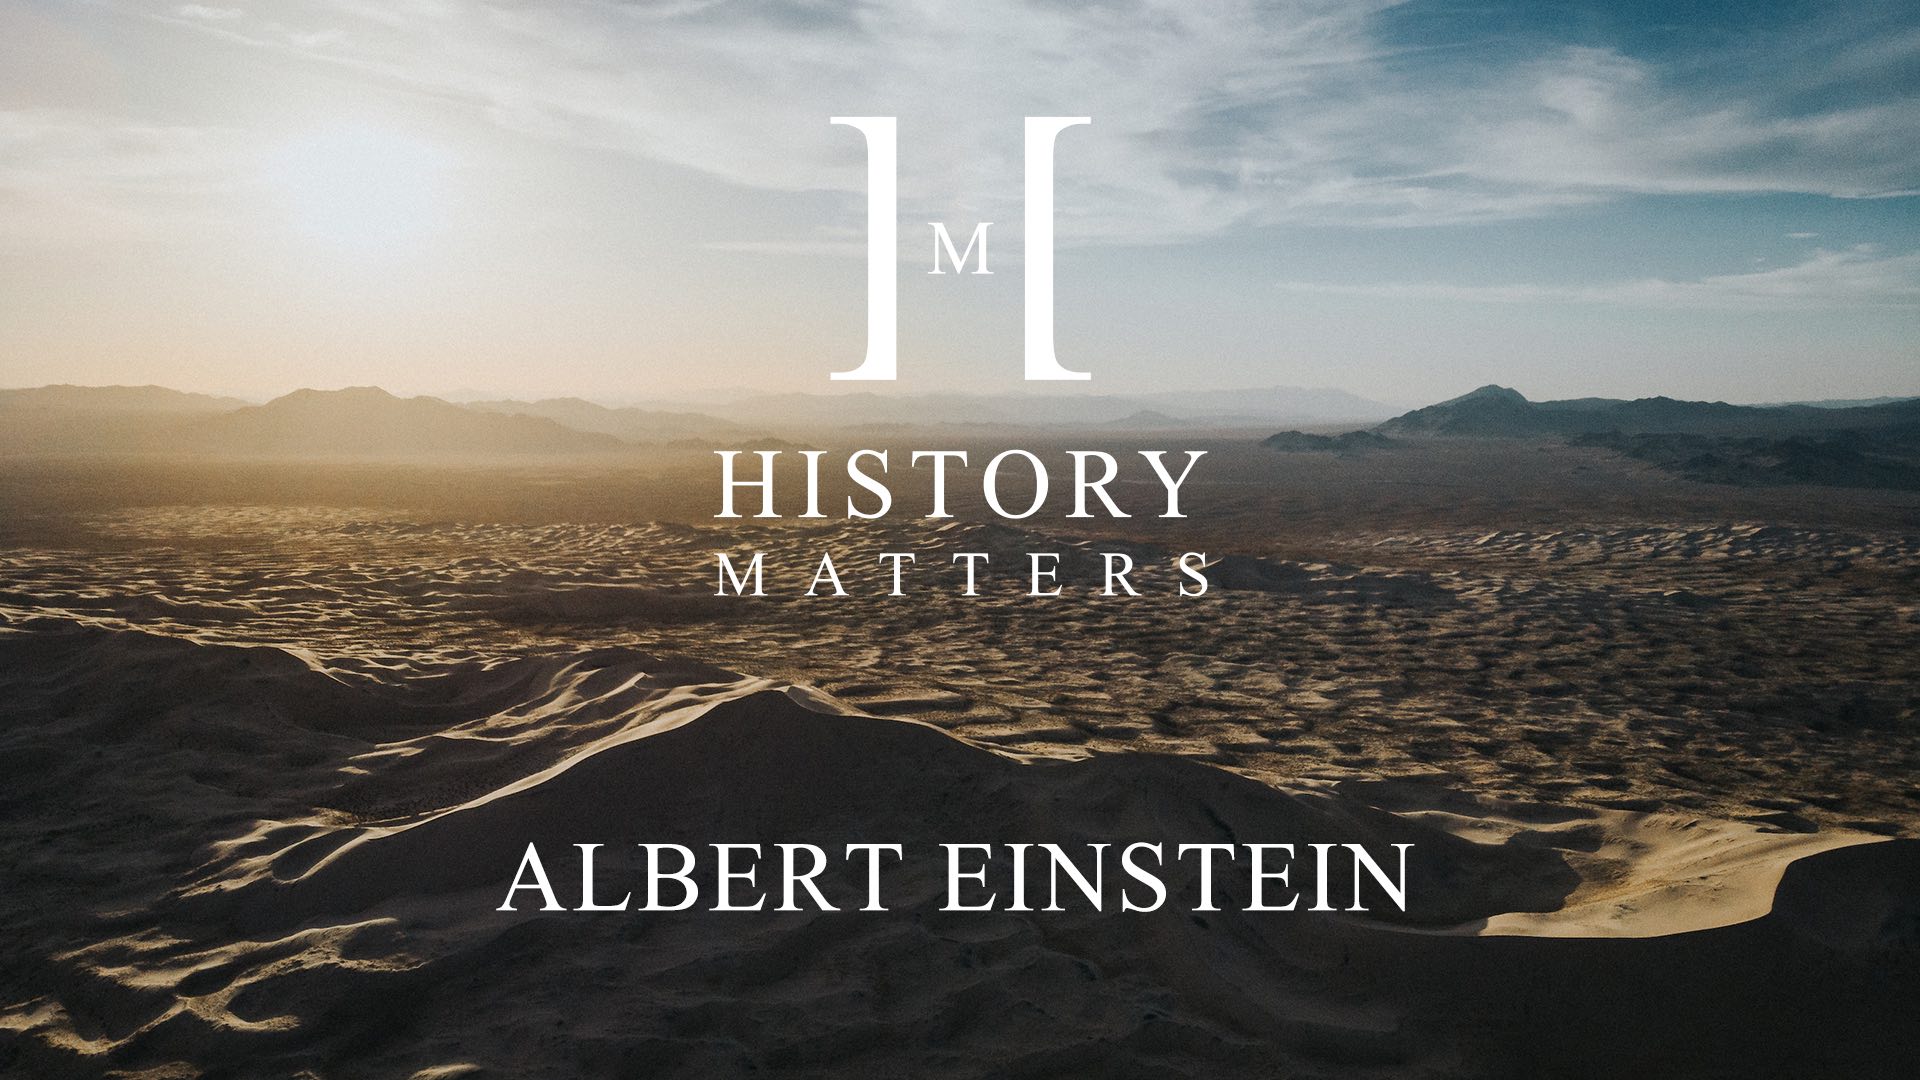 IU C&I Studios Page White HM Albert Einstein logo with background of sand dunes and mountains in a desert